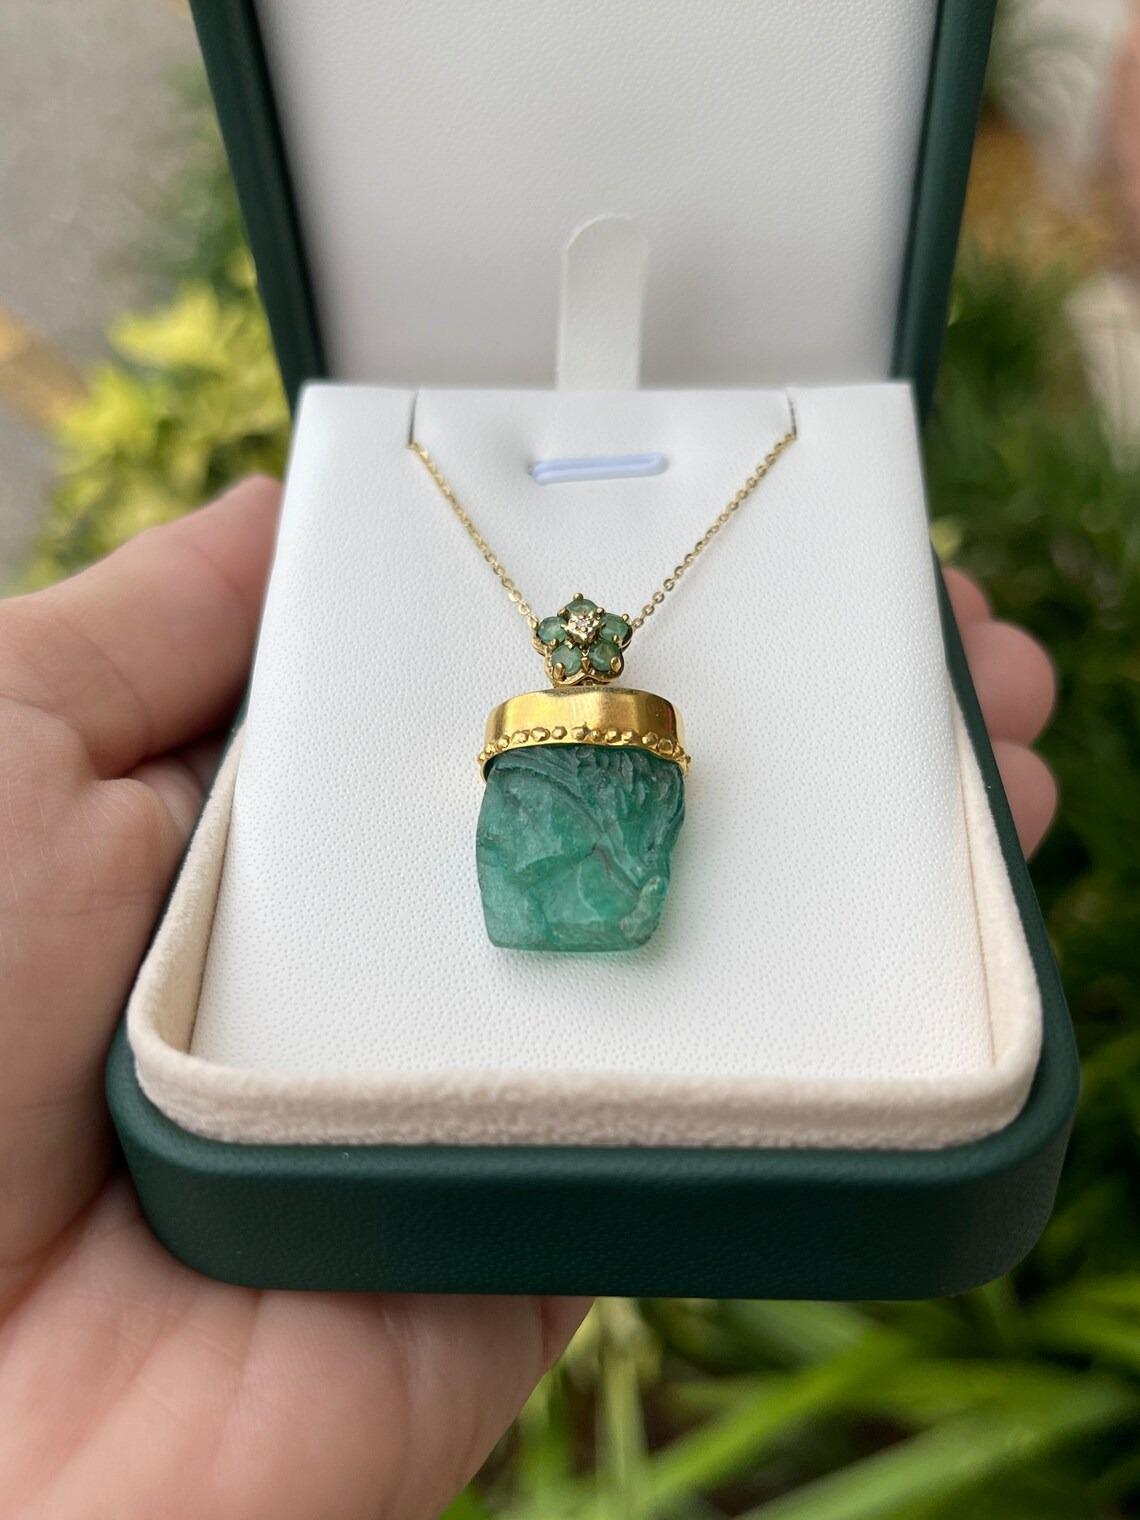 24tcw 14K Carved Rough Colombian Emerald Crystal Floral Gold Pendant Necklace In New Condition For Sale In Jupiter, FL